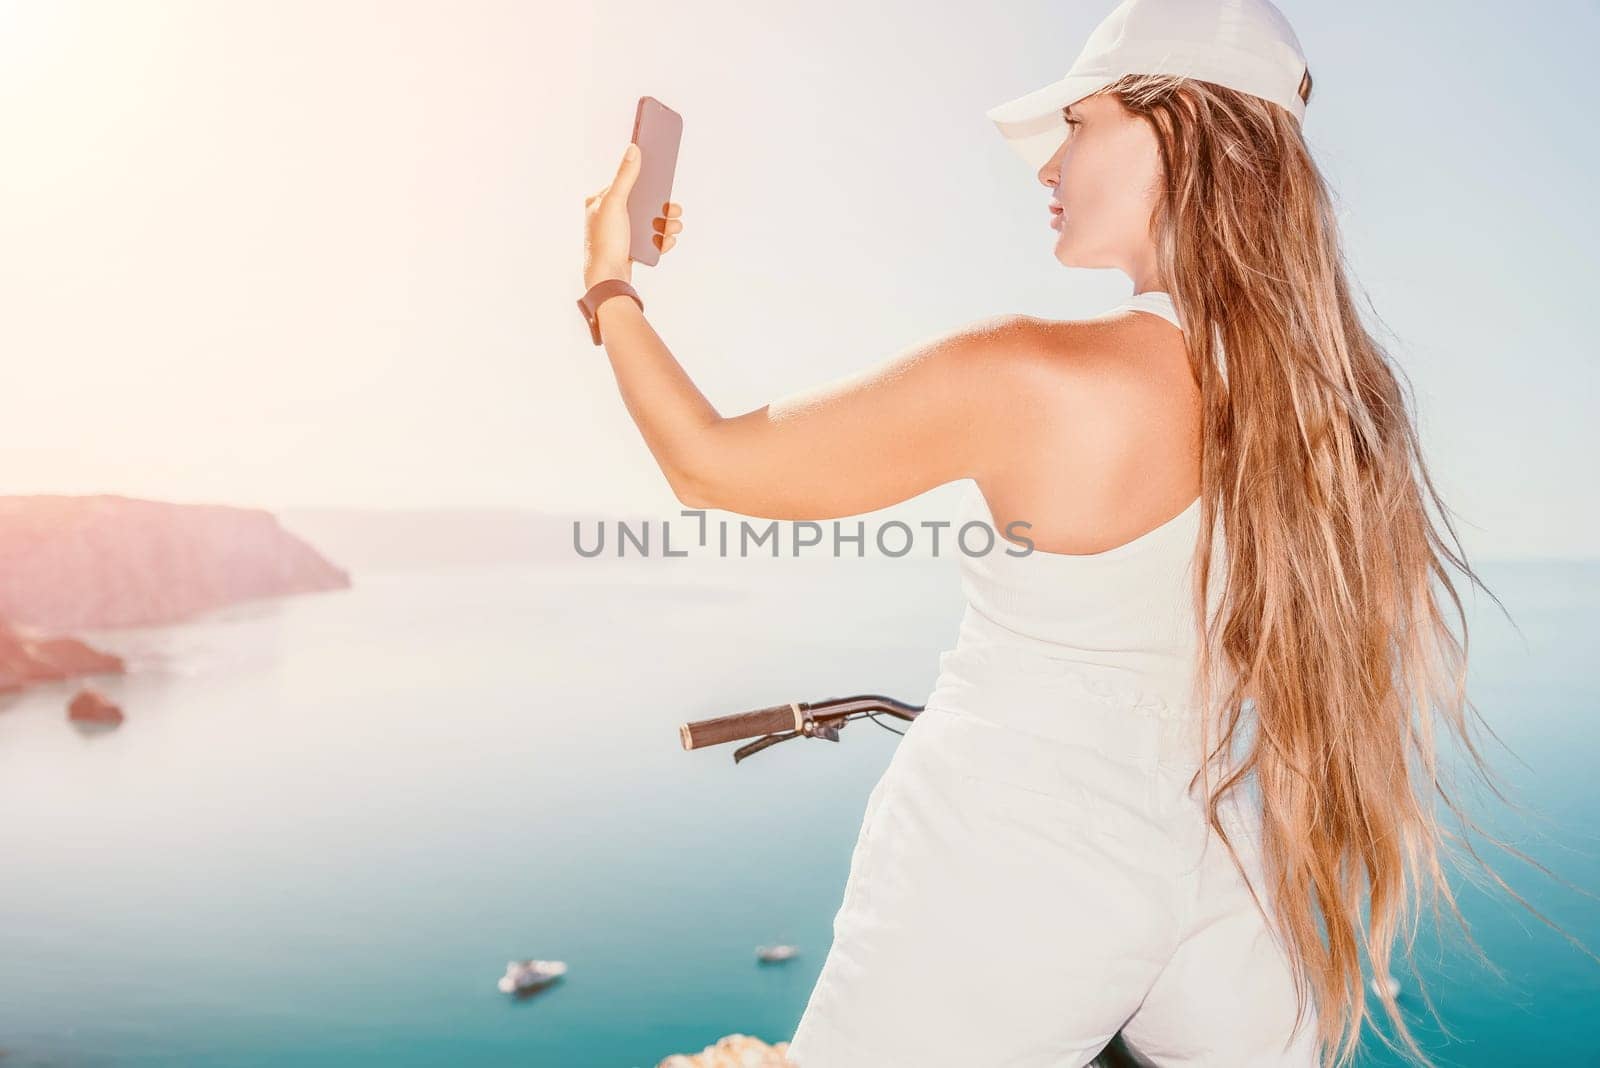 A woman cyclist on a mountain bike looking at the landscape of mountains and sea. Rear view of cyclist woman standing in front to the sea with outstretched arms. Freedom and healthy lifestyle concept. by panophotograph